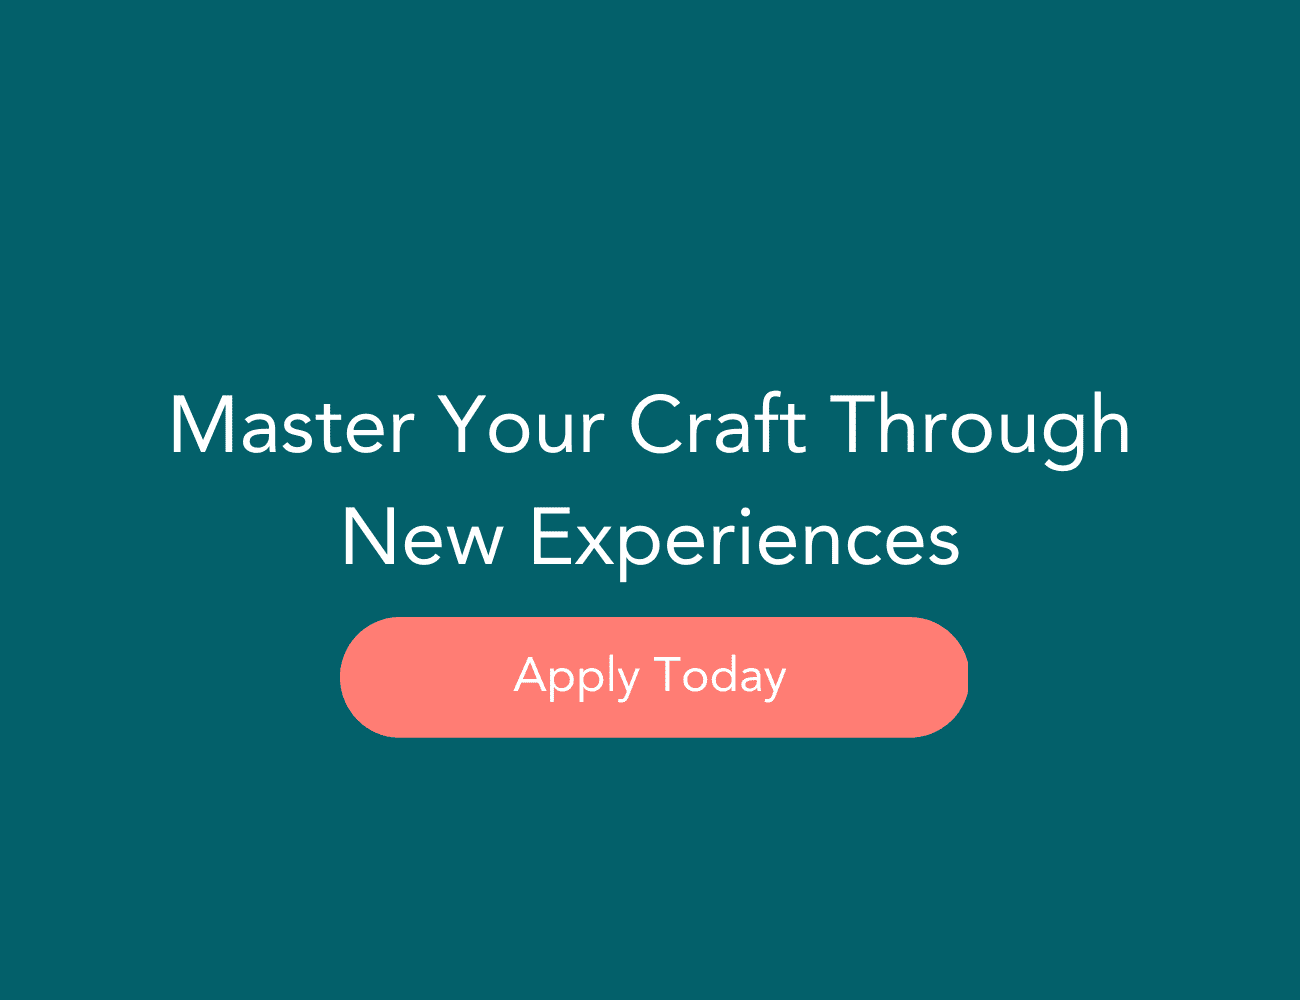 Master your craft through new experiences. Apply today!